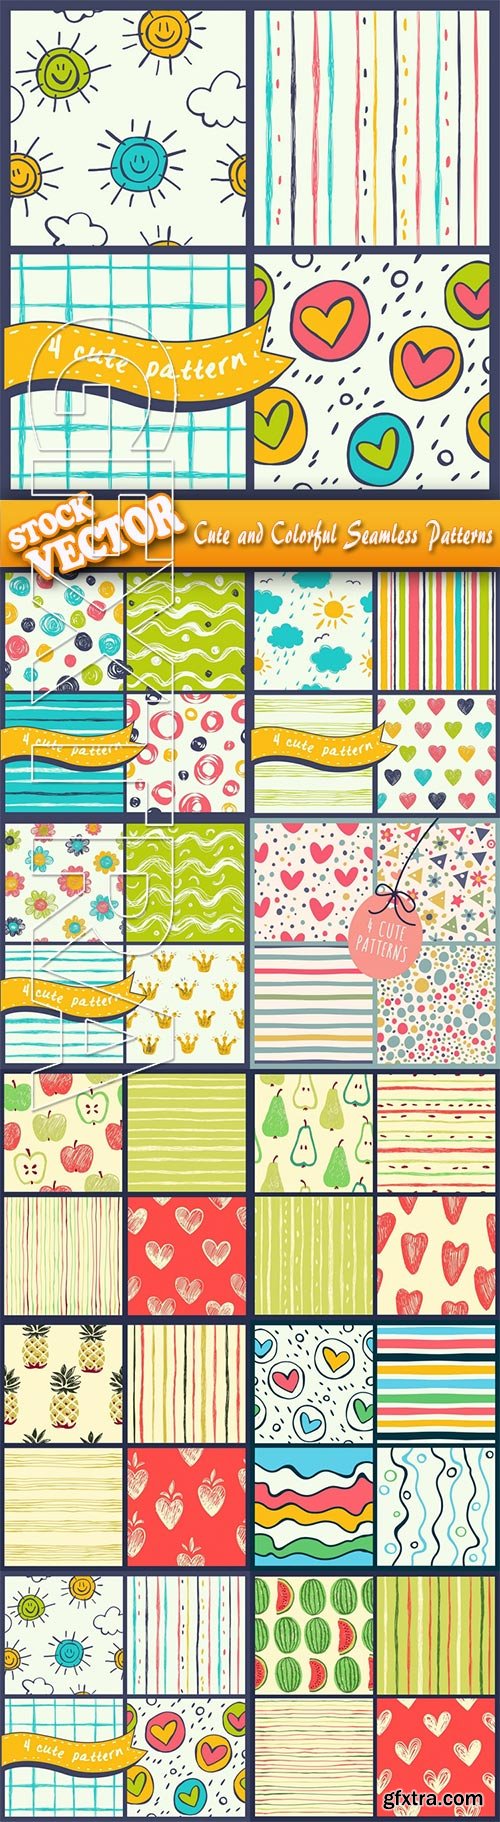 Stock Vector - Cute and Colorful Seamless Patterns